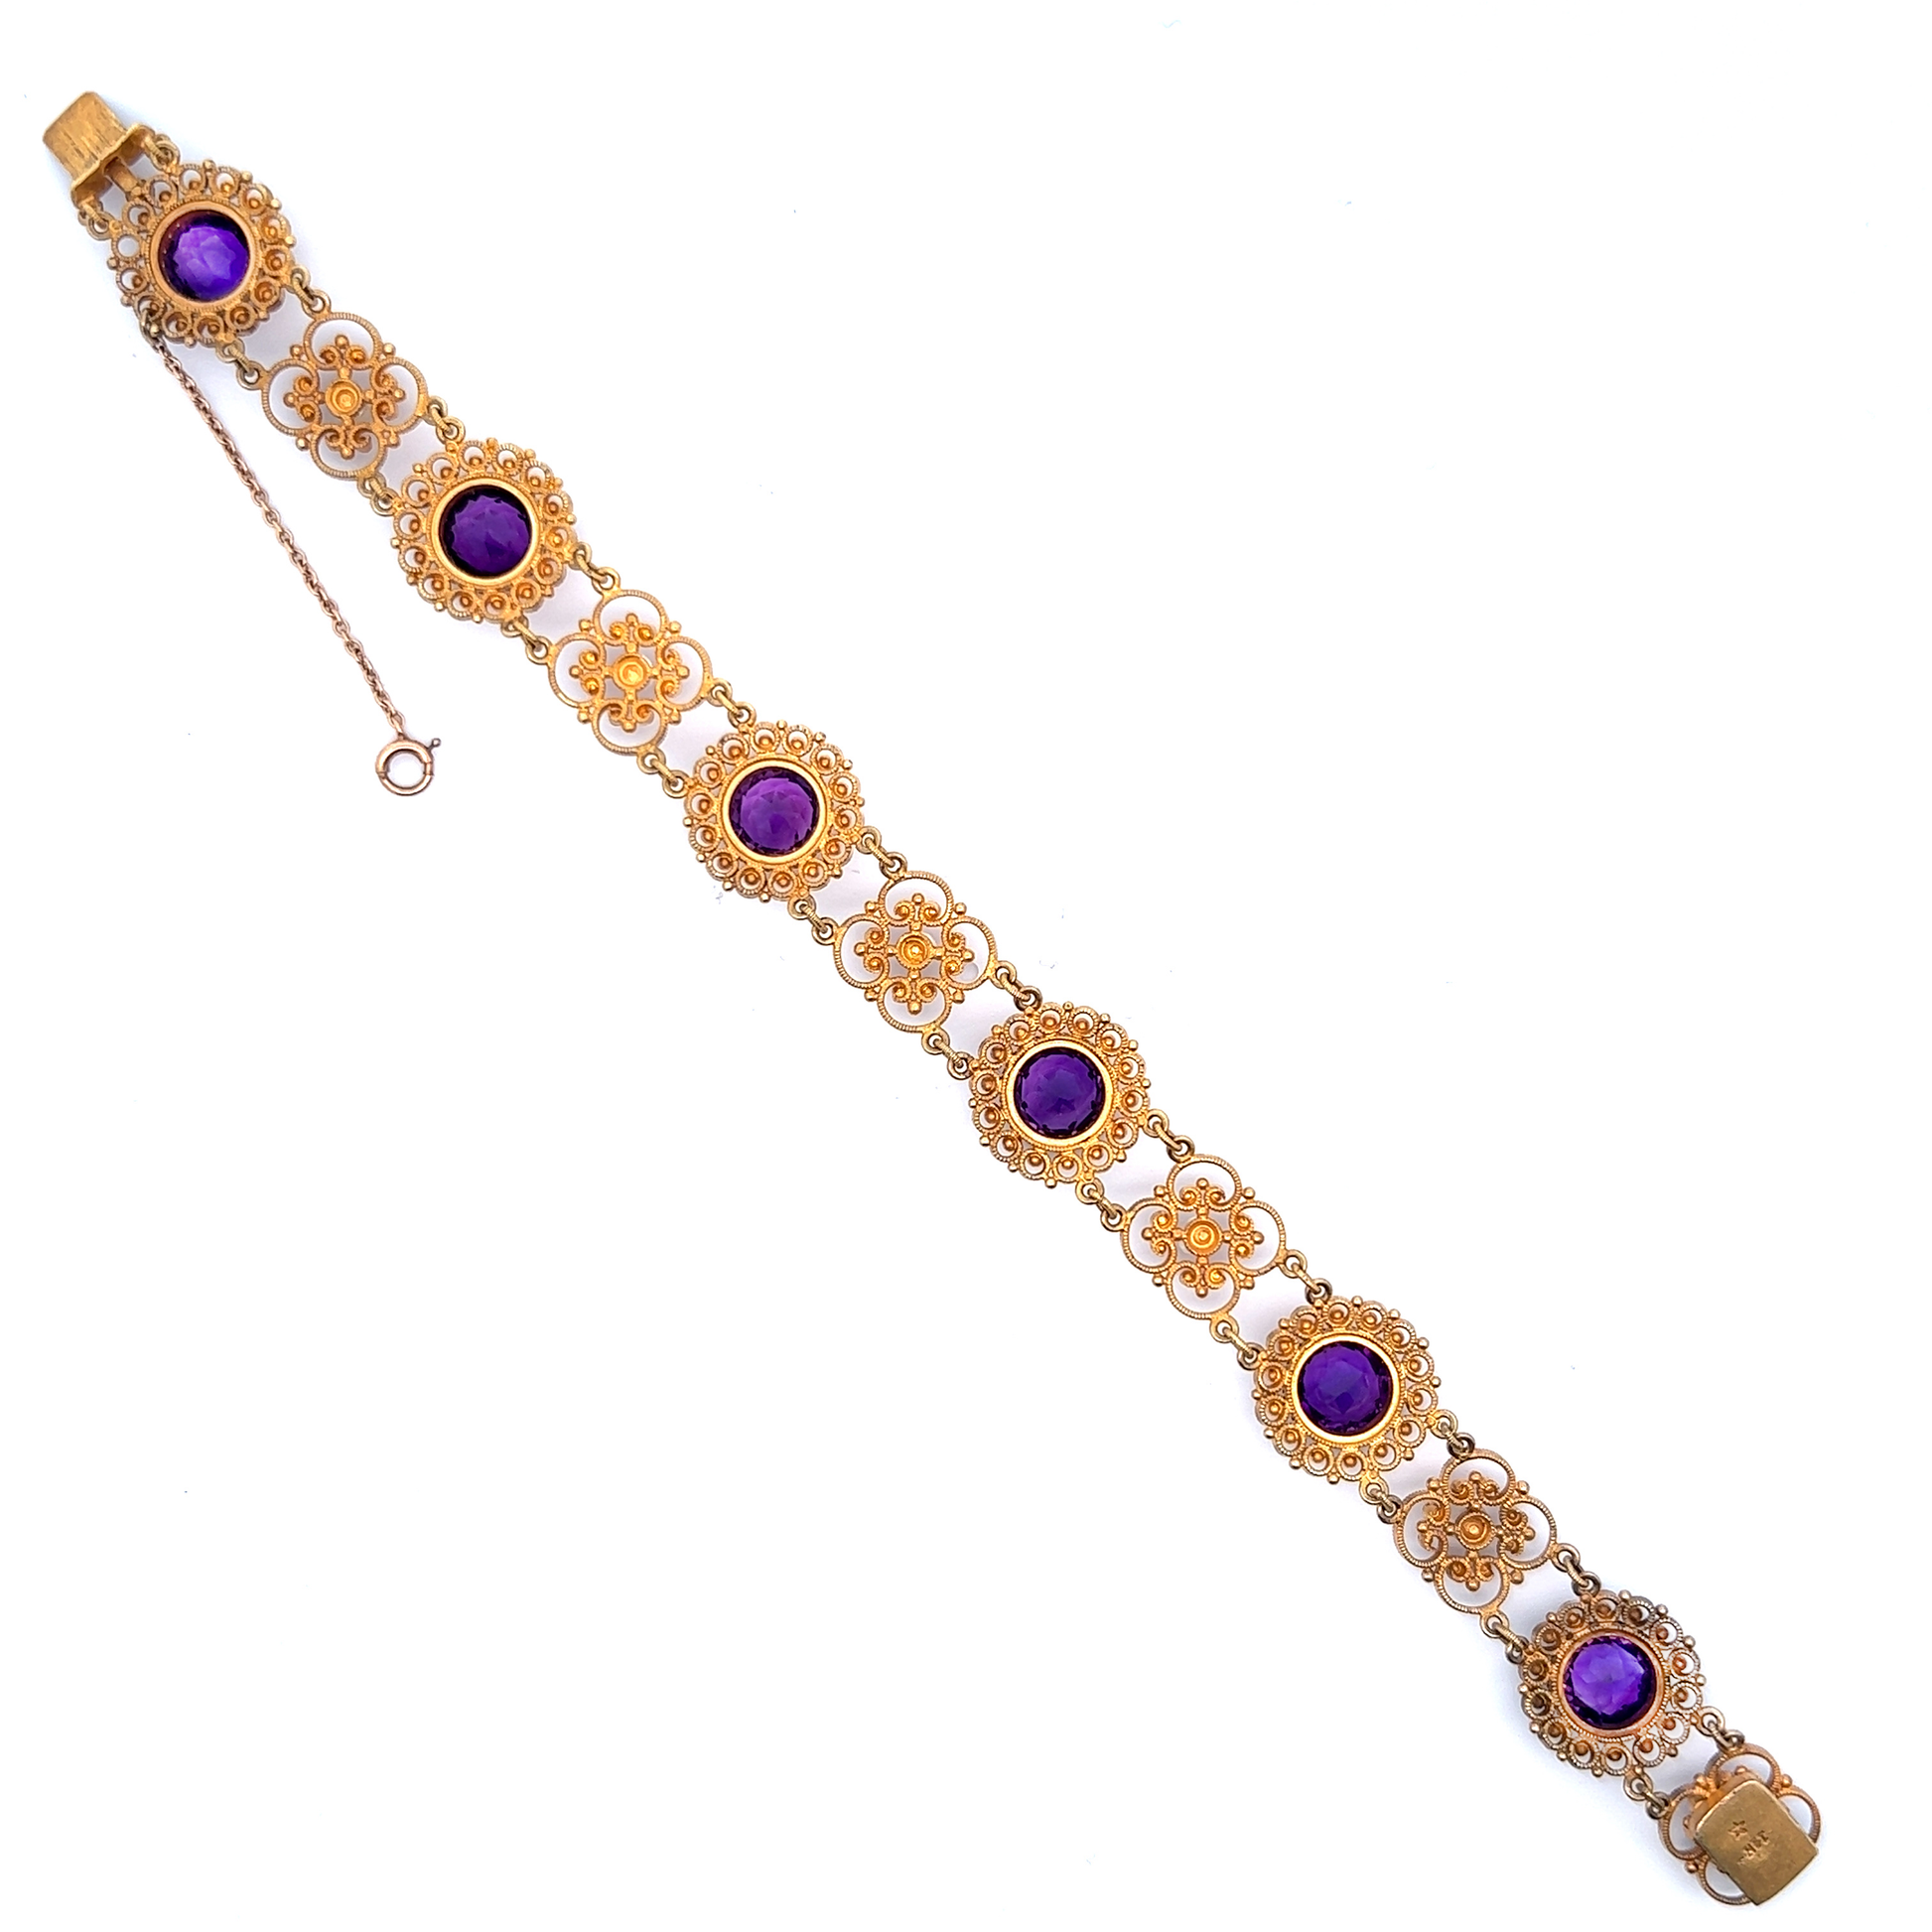 Victorian 14KT Yellow Gold Amethyst & Pearl Bracelet laid flat front view